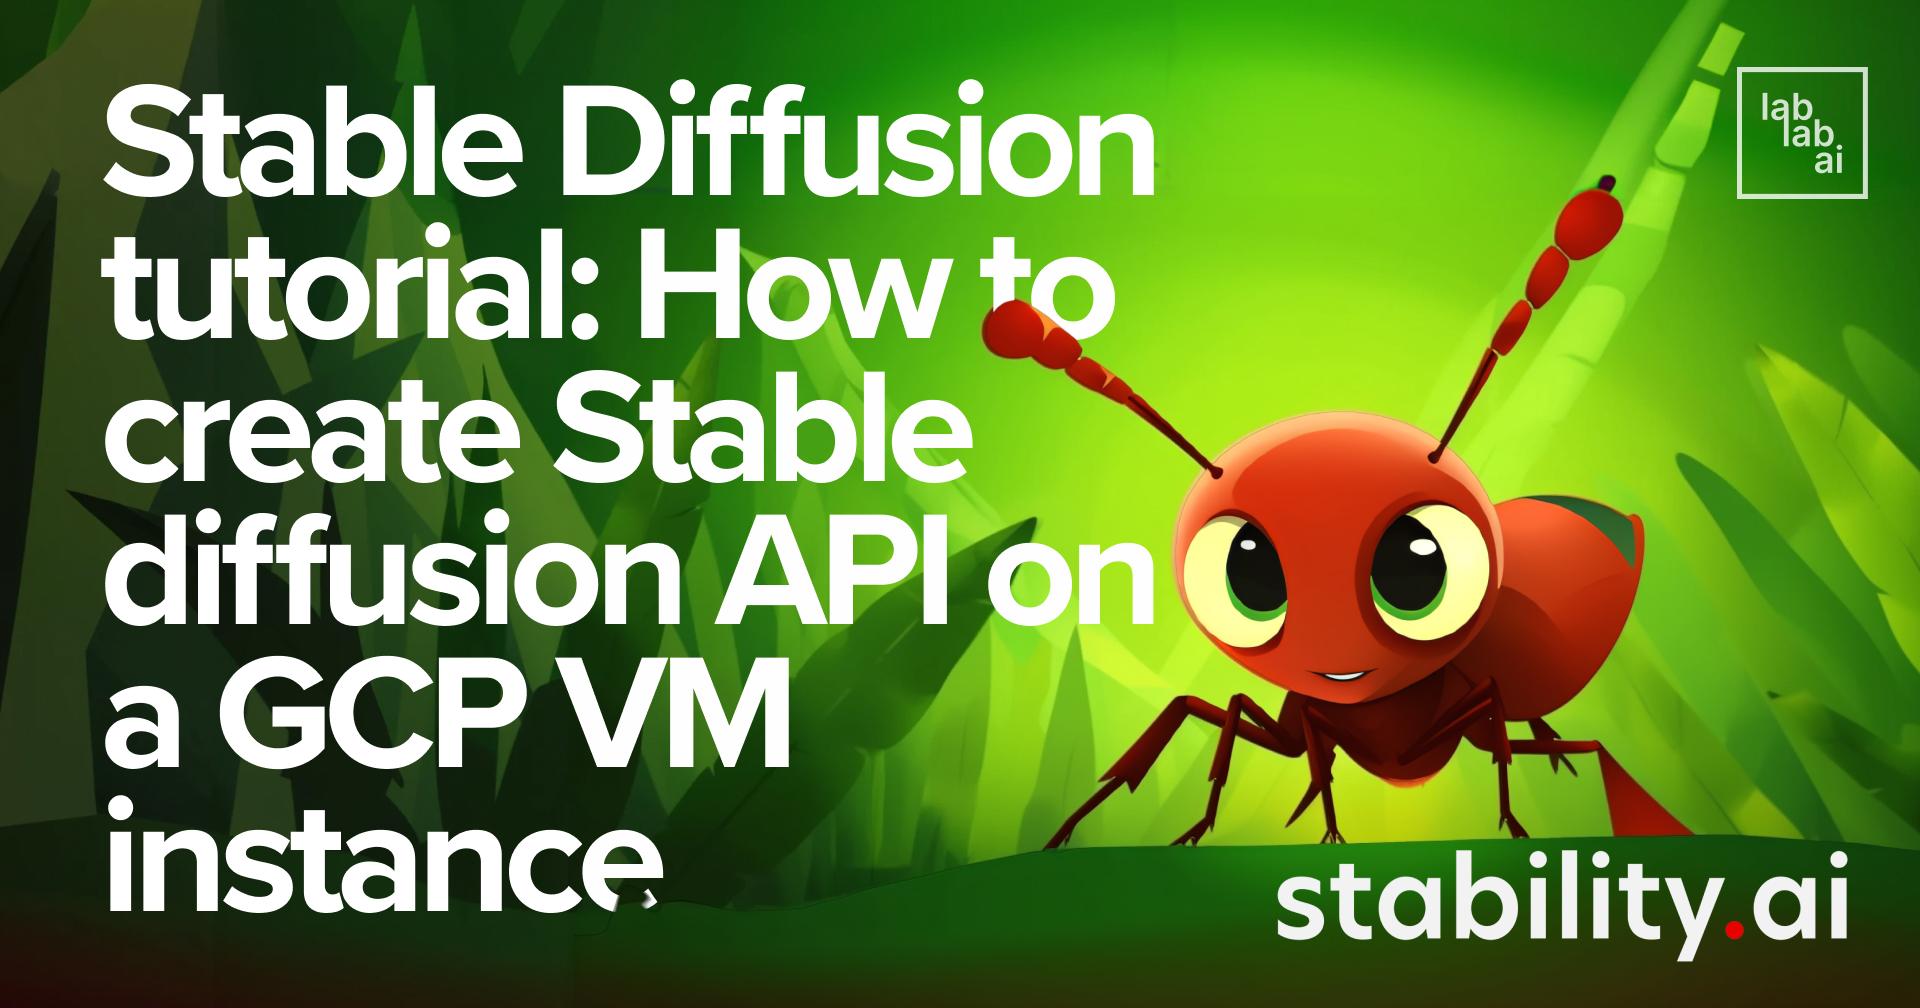 How to create Stable diffusion API on a GCP VM instance